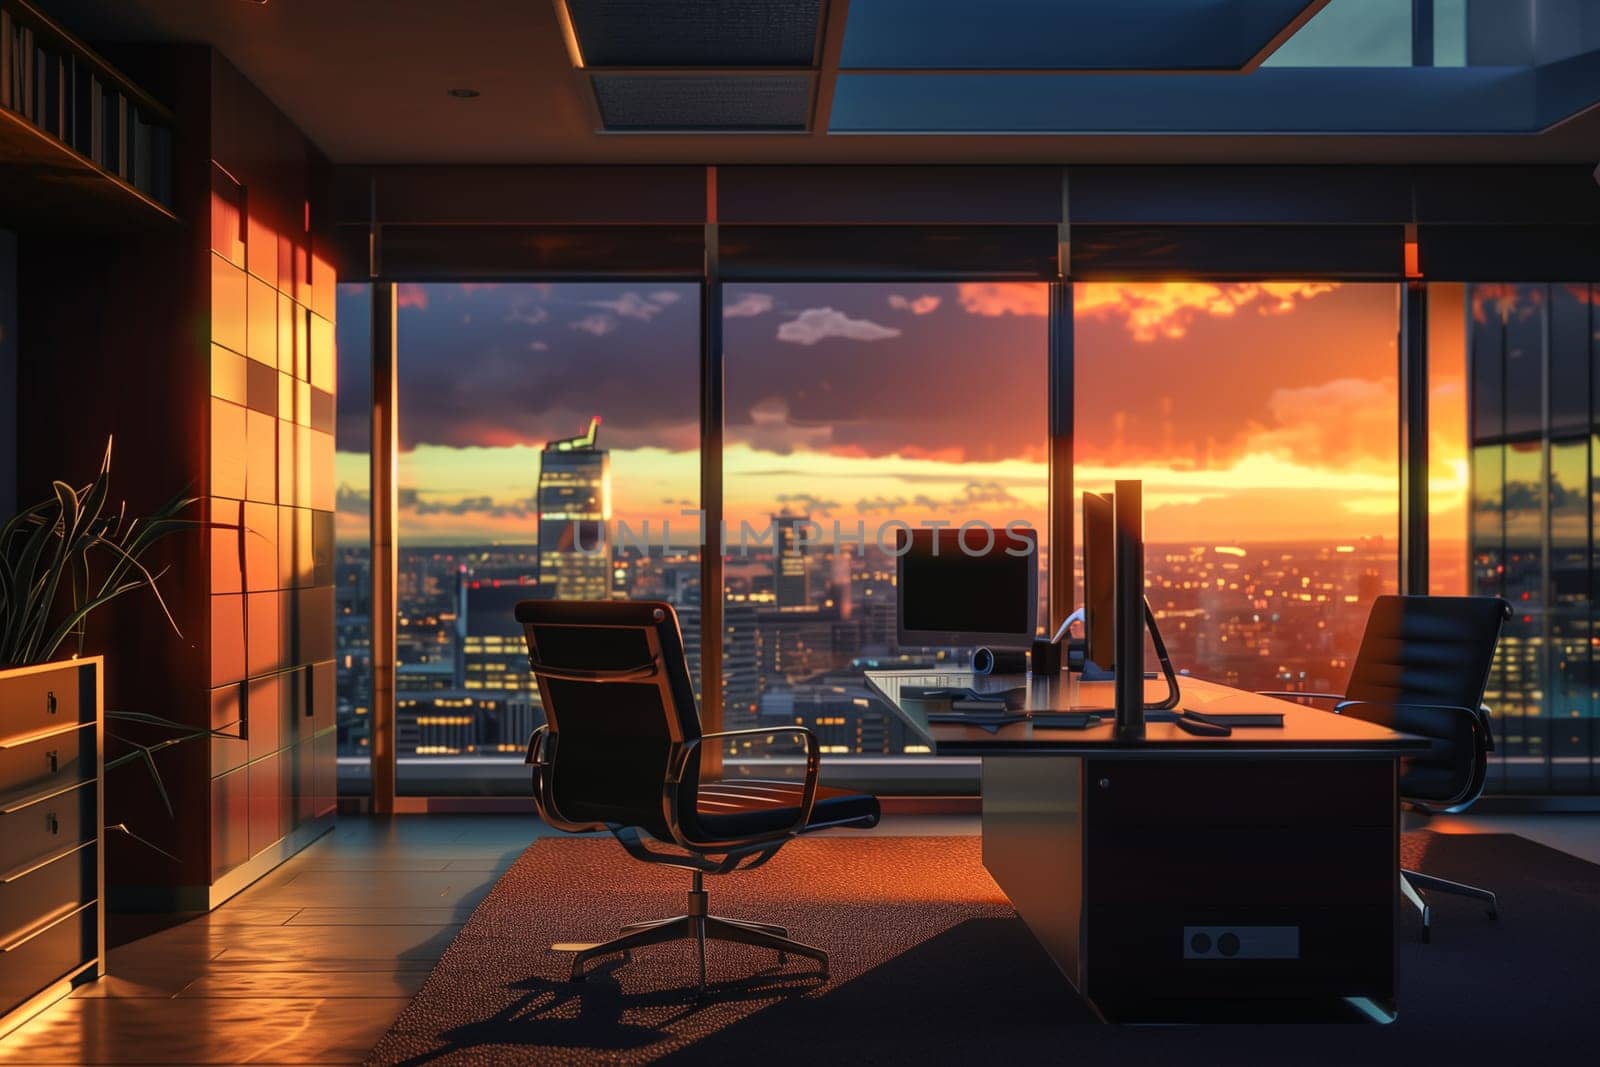 An office overlooking the city skyline with buildings illuminated by the warm hues of a sunset.